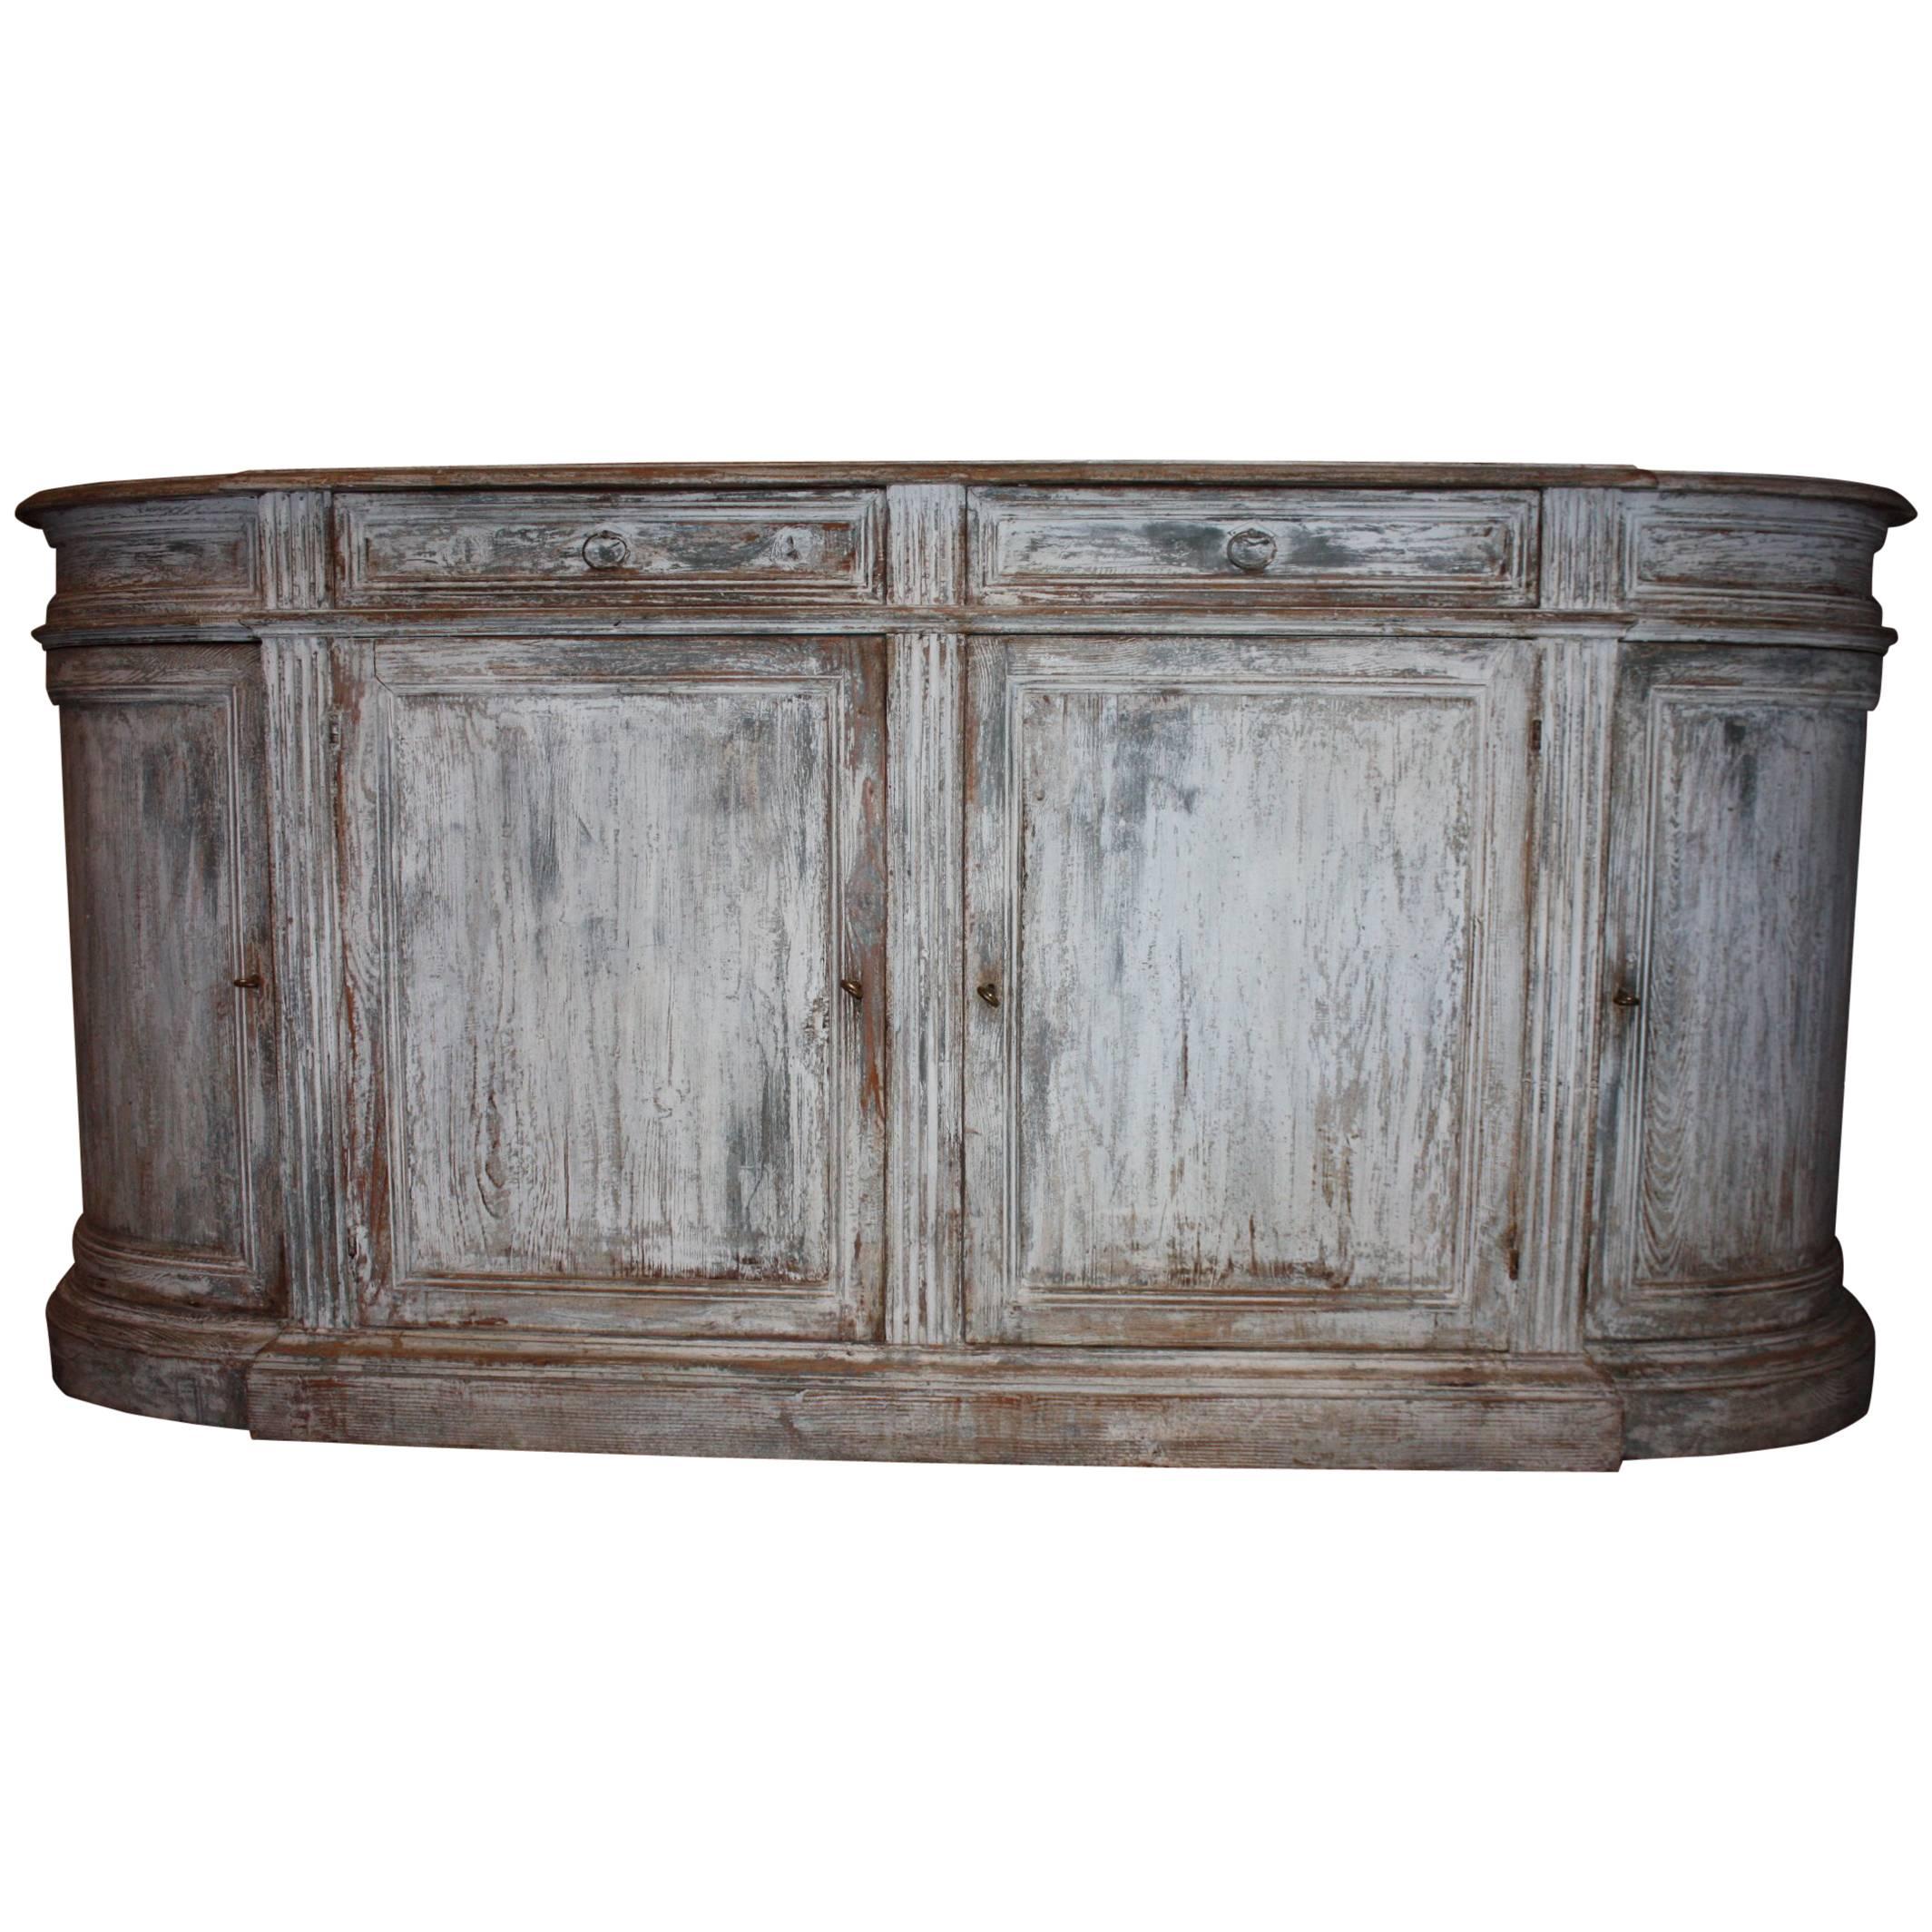 Hand-Painted Pine Italian Buffet or Credenza